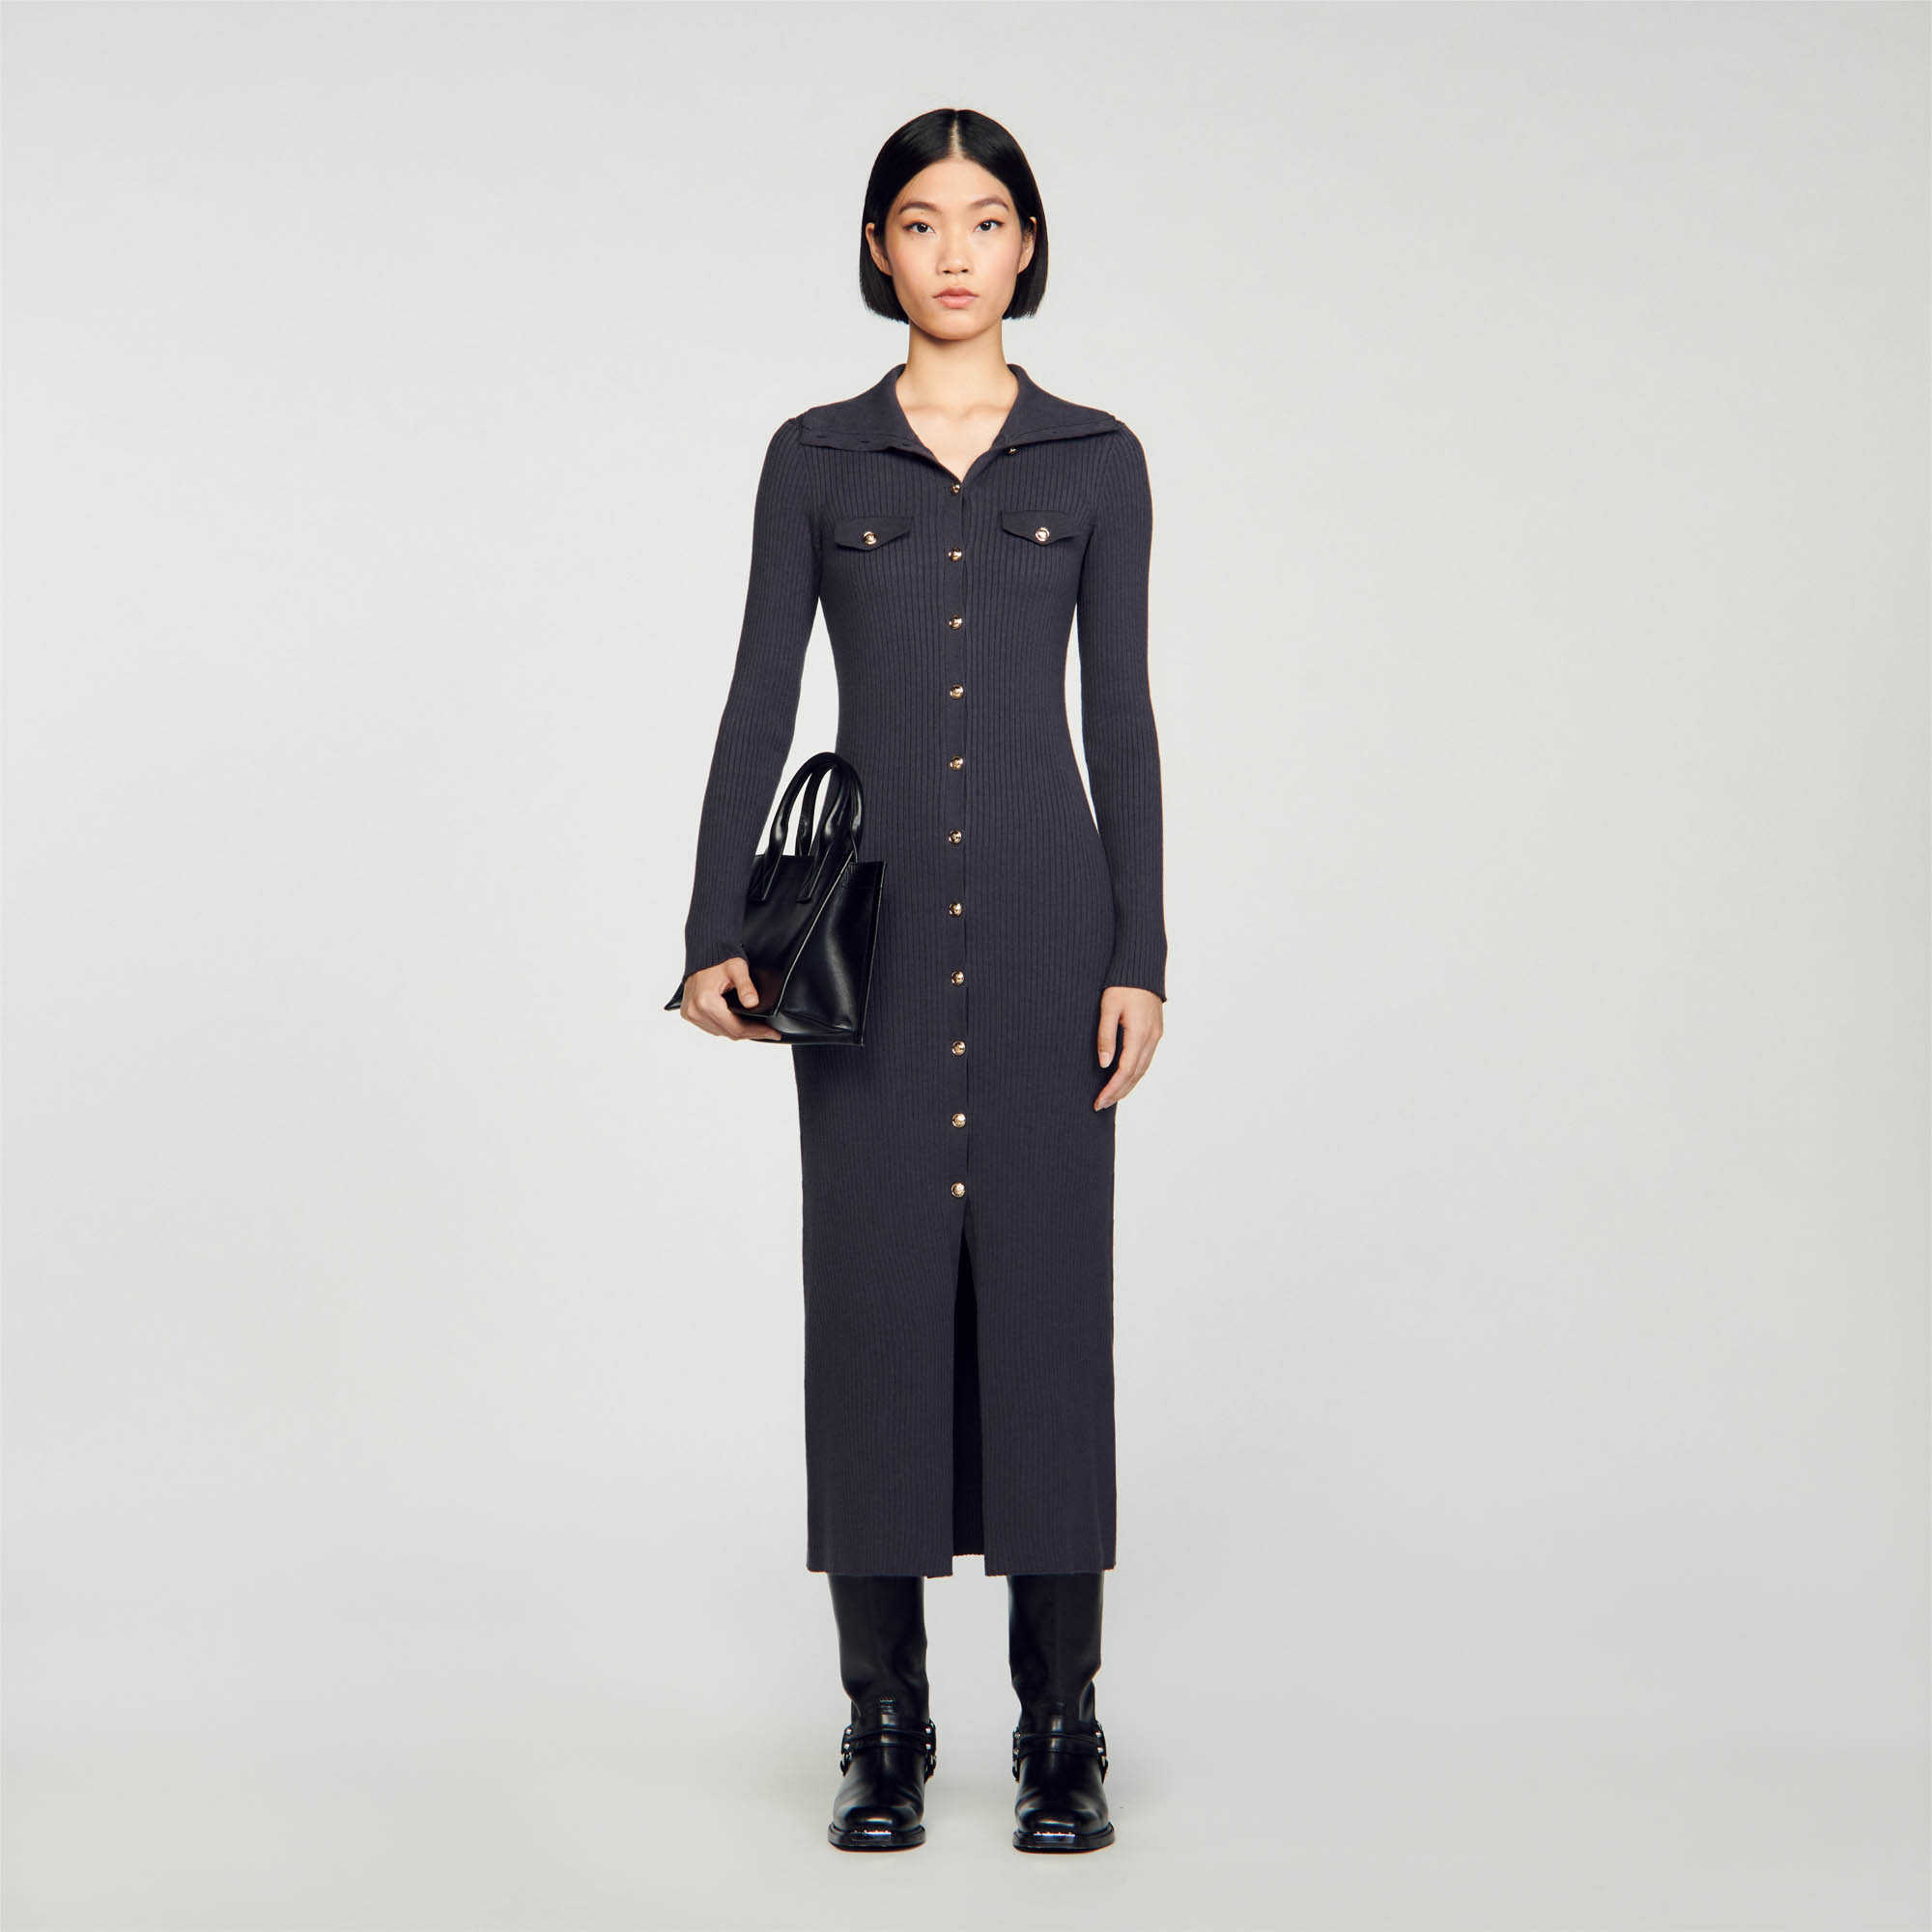 Sandro cotton Maxi dress in rib knit with high neck, buttons all the way down and mock pockets with flaps on the chest